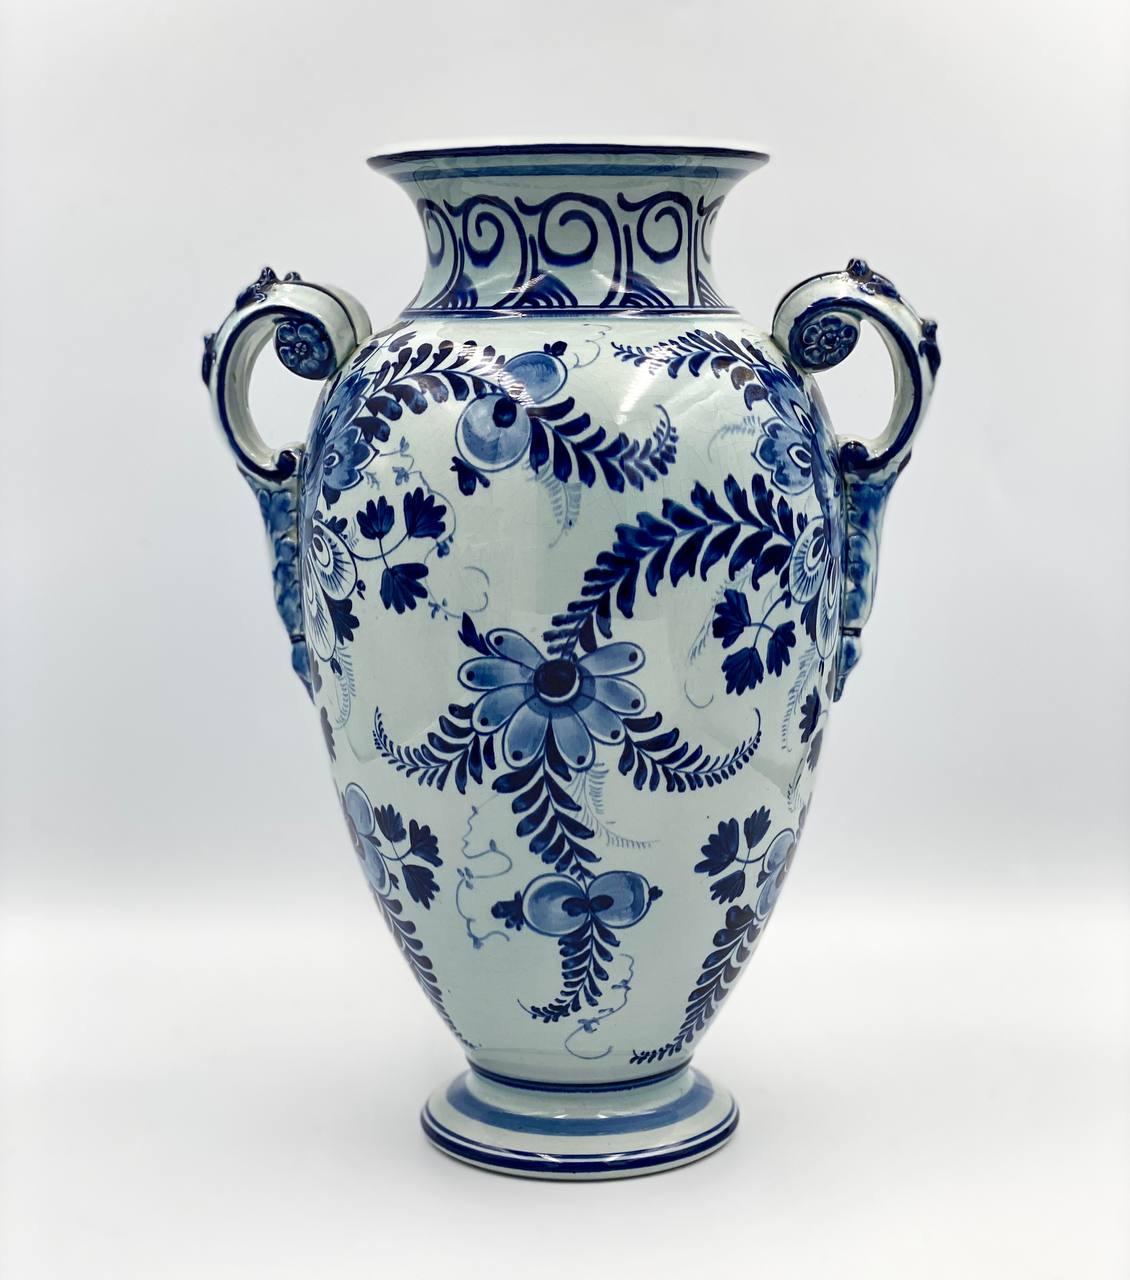 Faience Absolutely Antique Blue Vases Delft Bonnie  Set Of Three, Germany, 1890-1900 For Sale